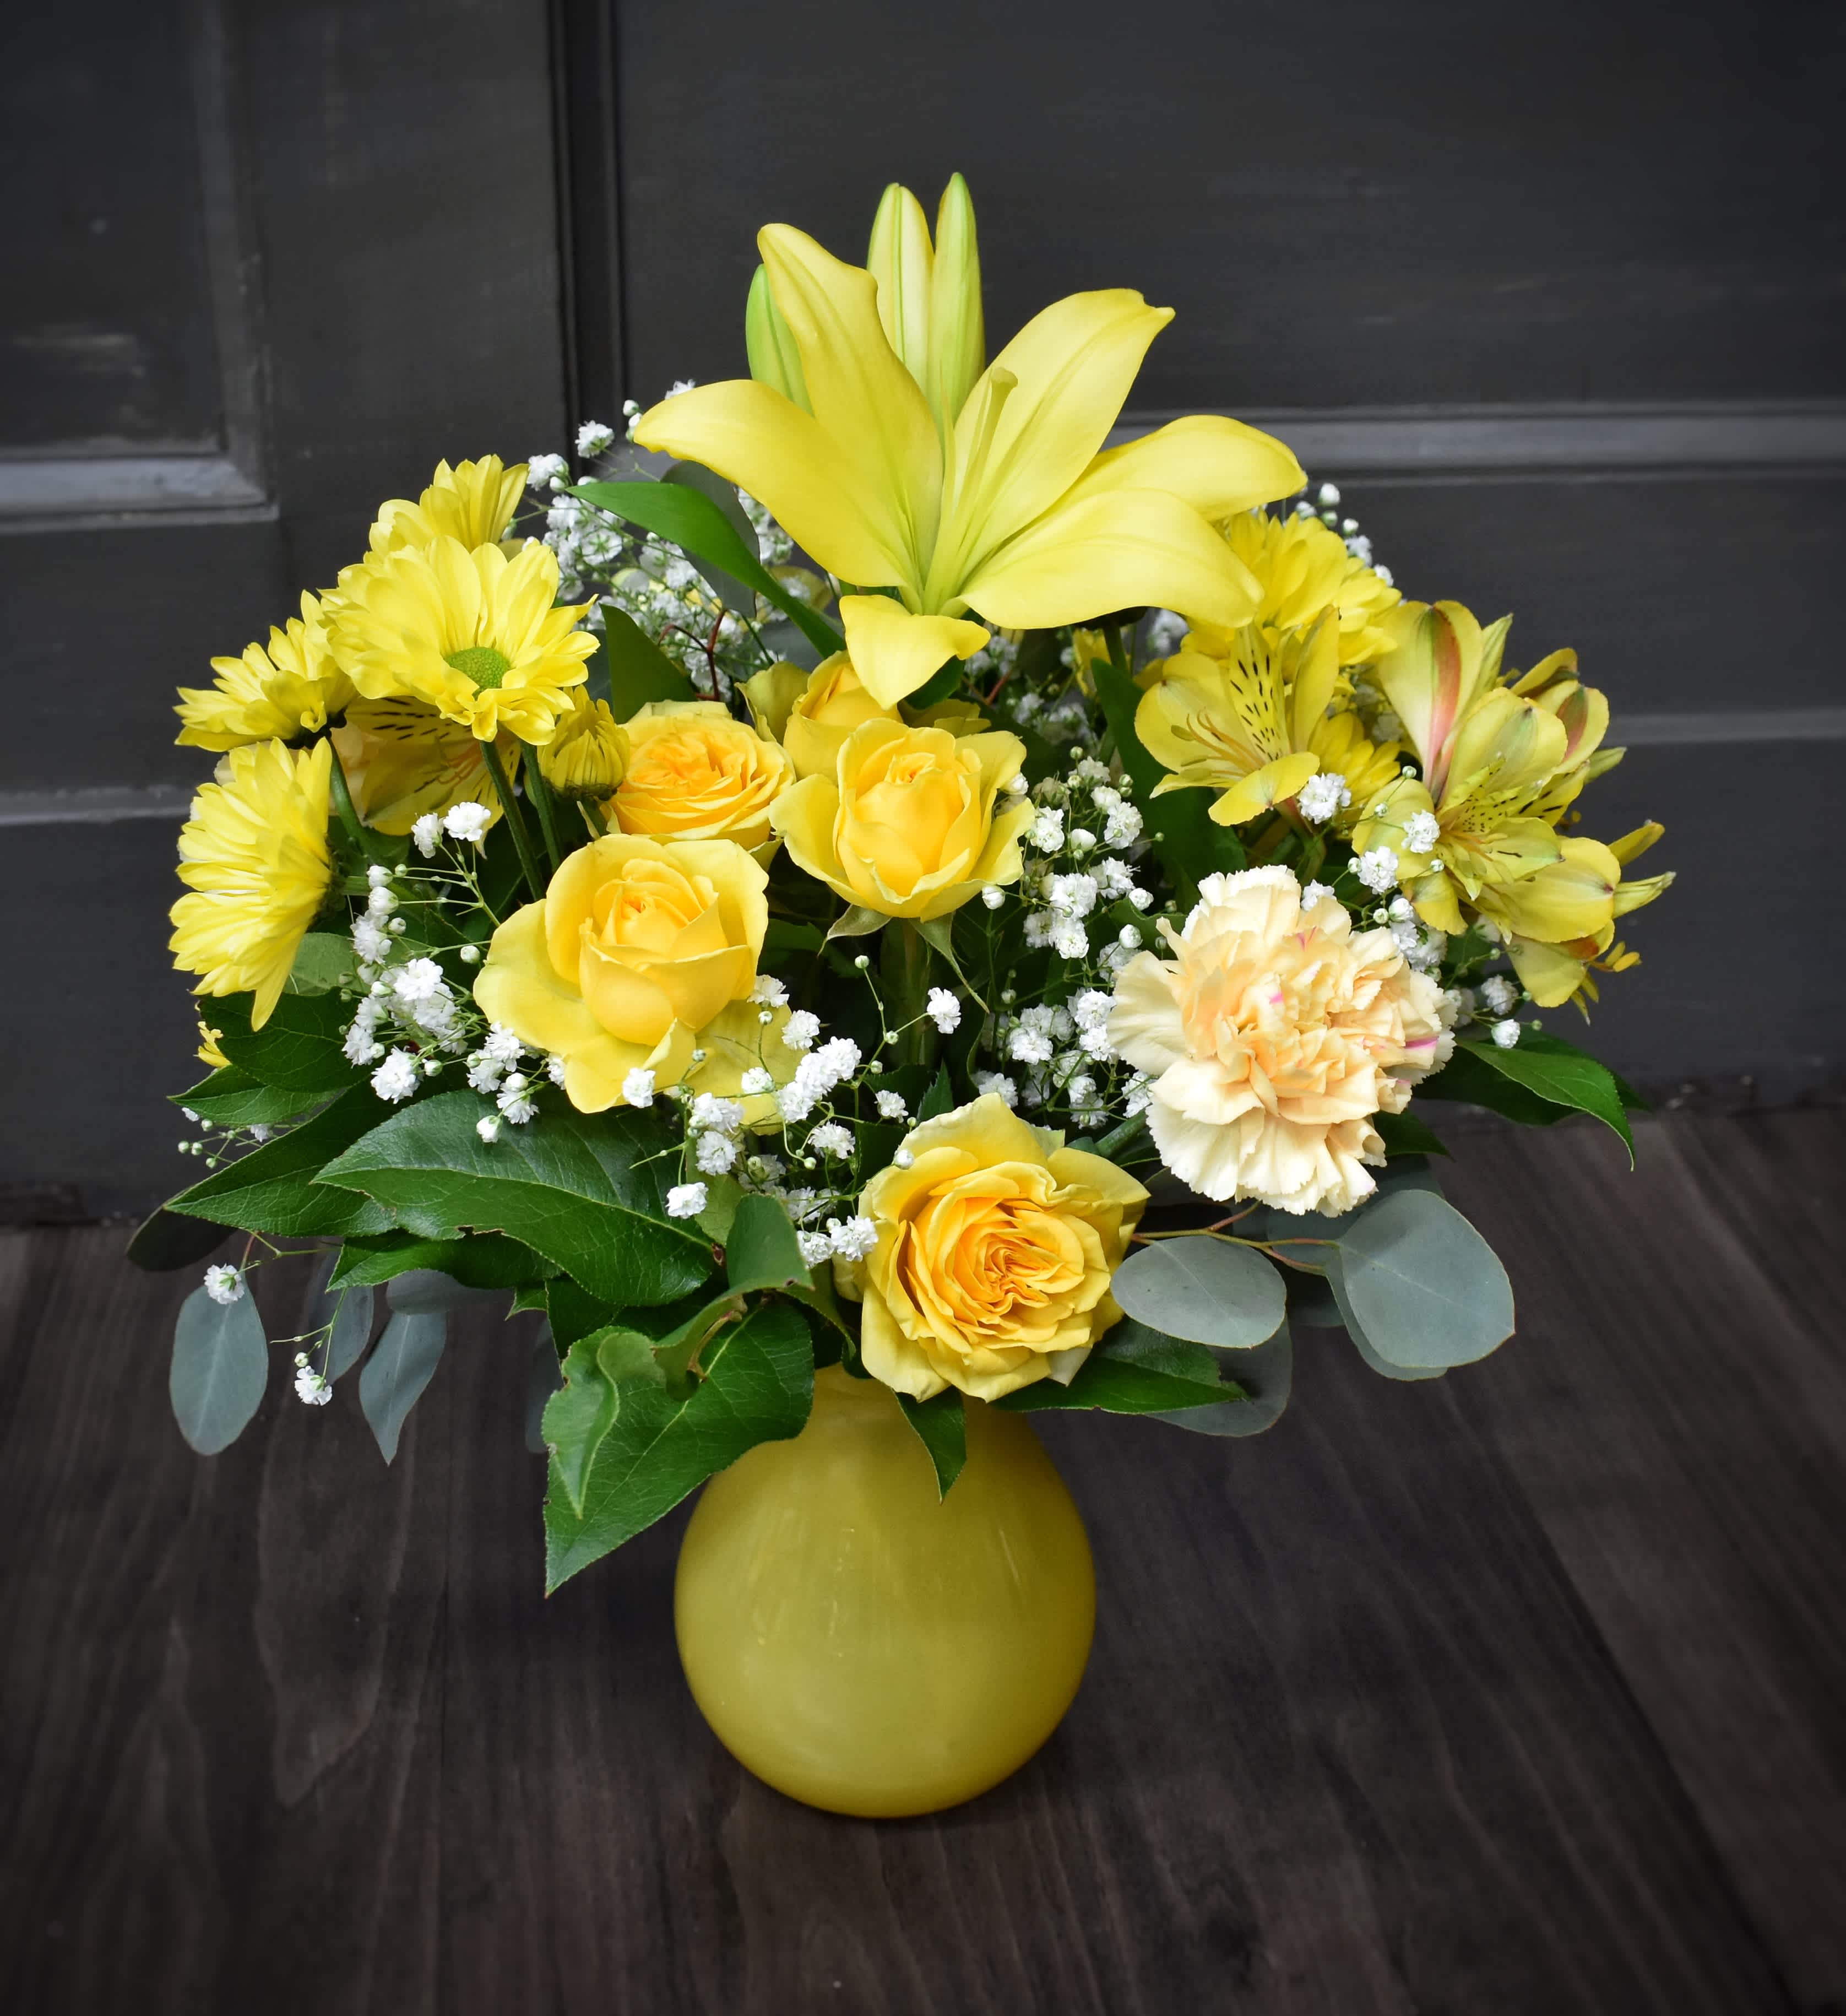 Lemon Zest - This sunny yellow bouquet is sure to make someone smile! We've designed it using a bright yellow glass vase filled with daisies, spray roses, lilies and carnations. The deluxe version includes sky blue delphinium and the premium size has stems of fragrant pale yellow stock.